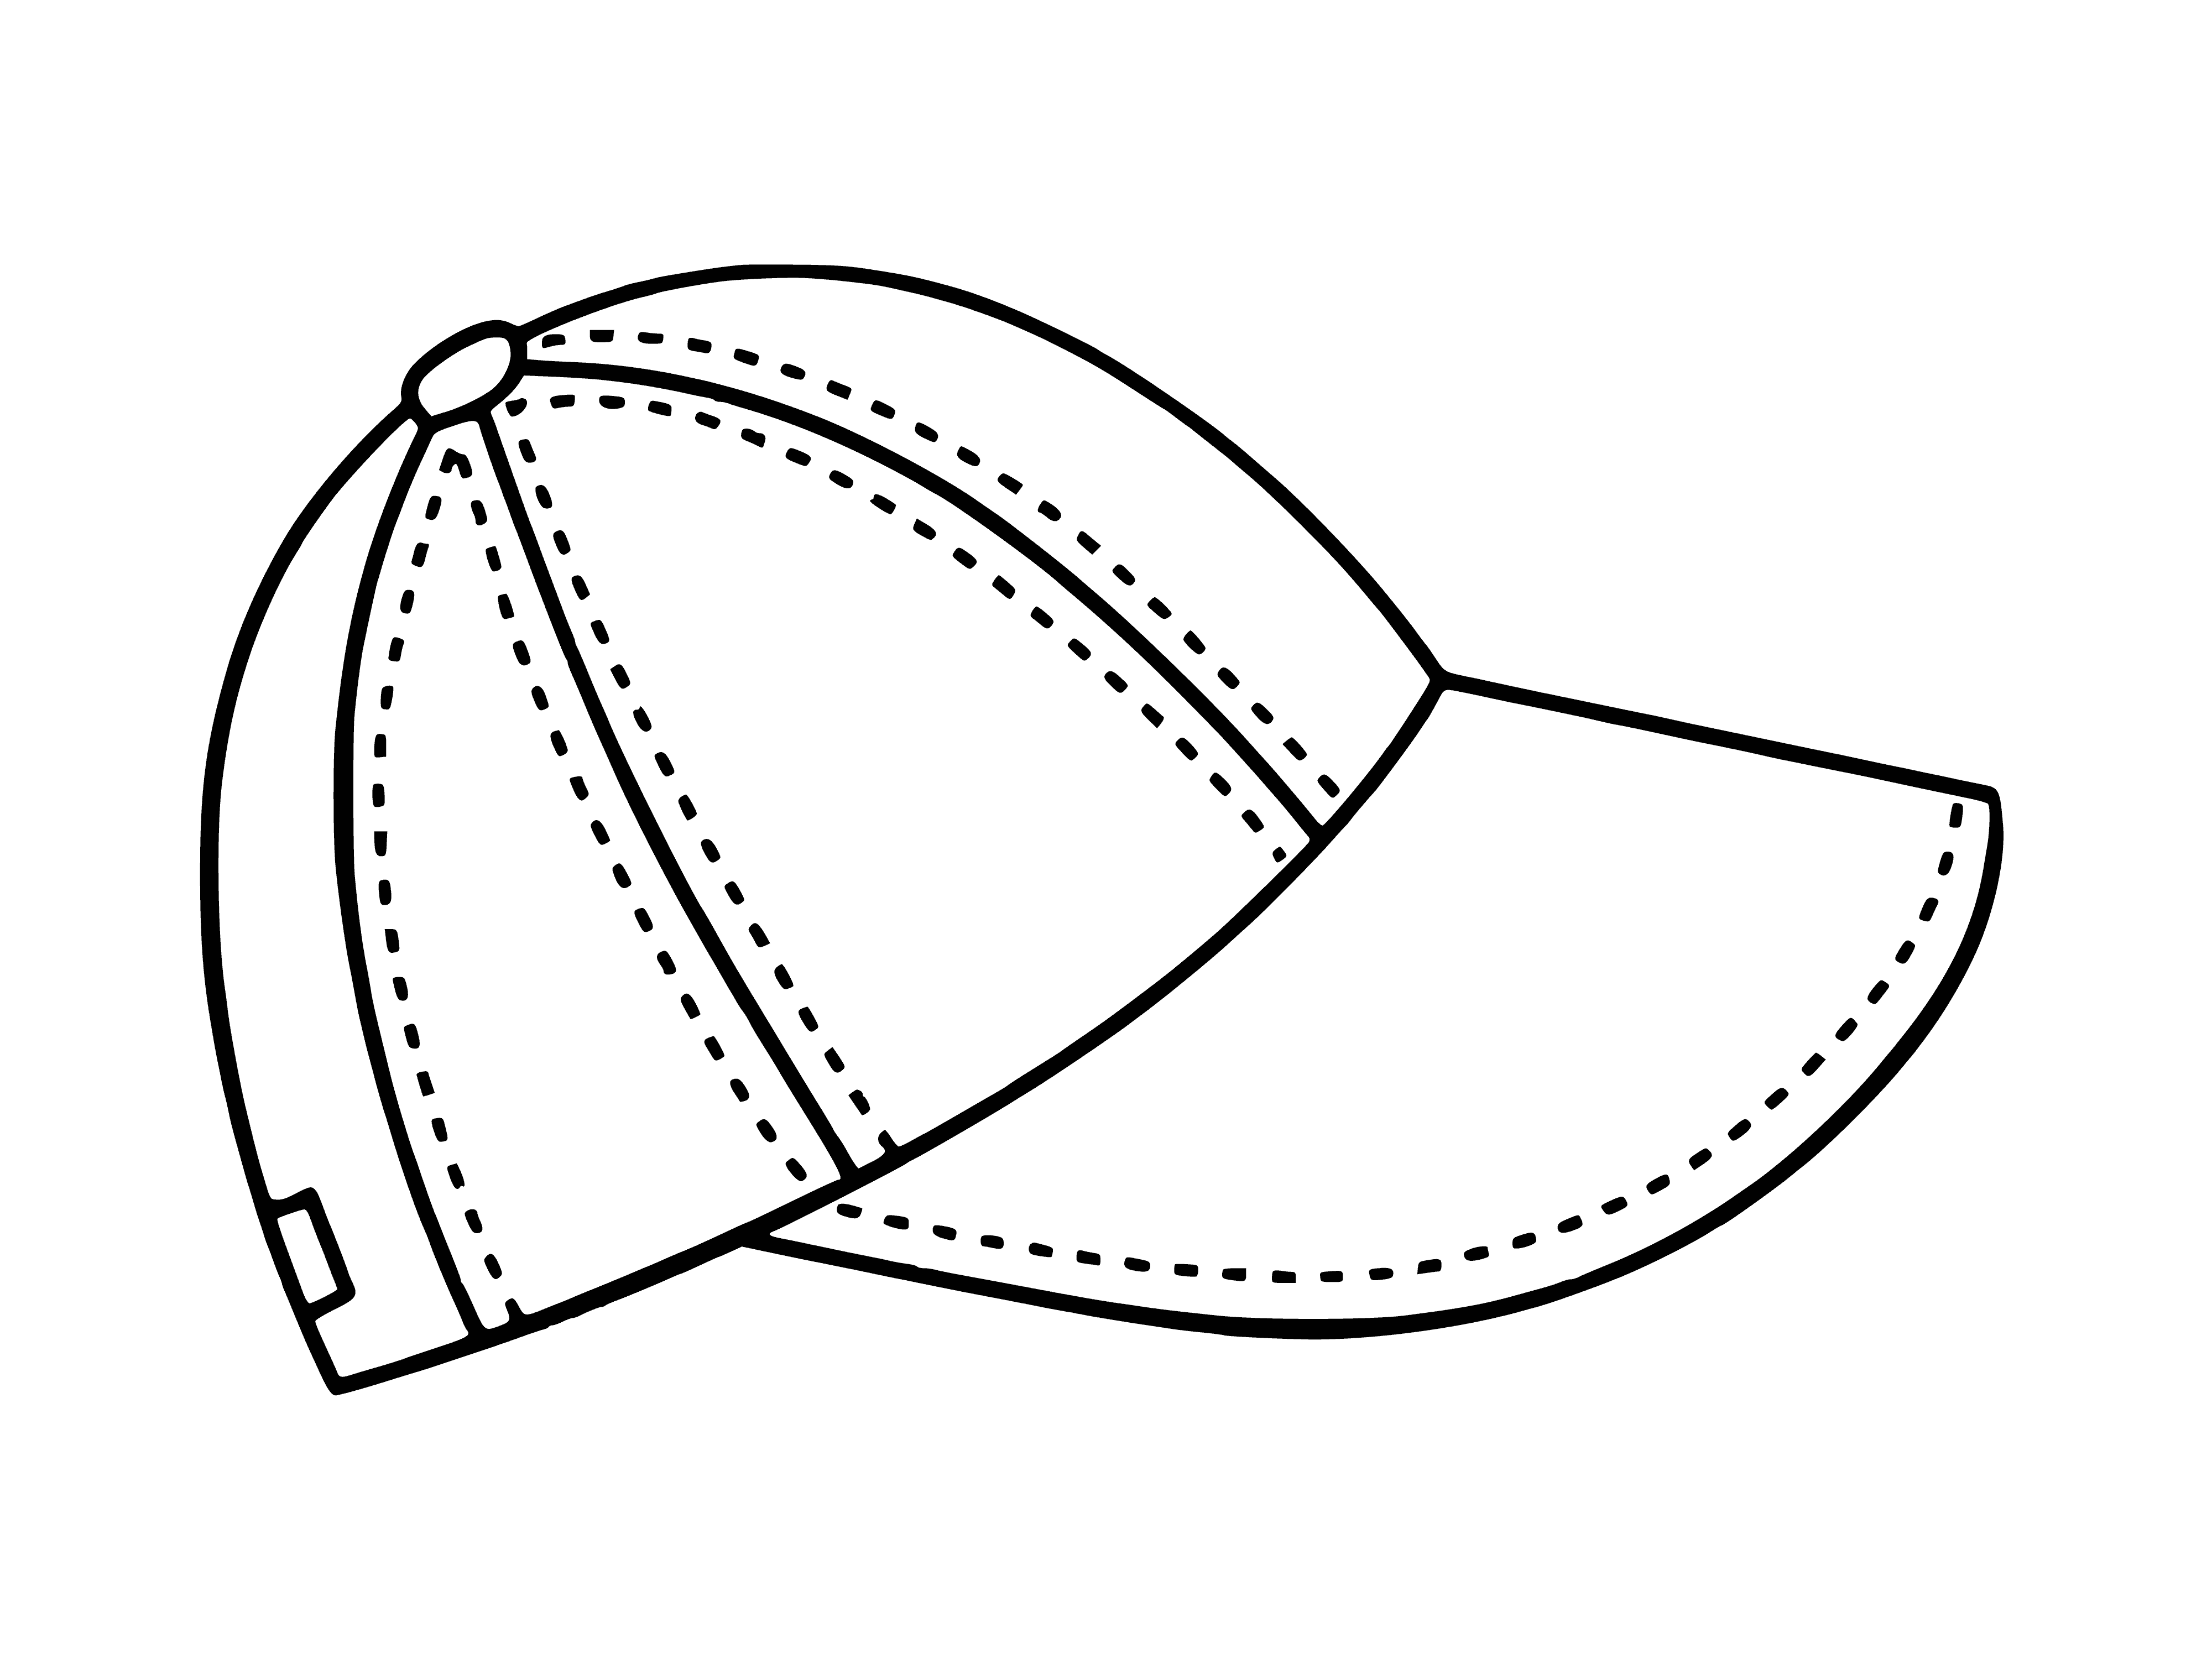 coloring page: Baseball cap from Gap; brim curved, adjustable strap in back.